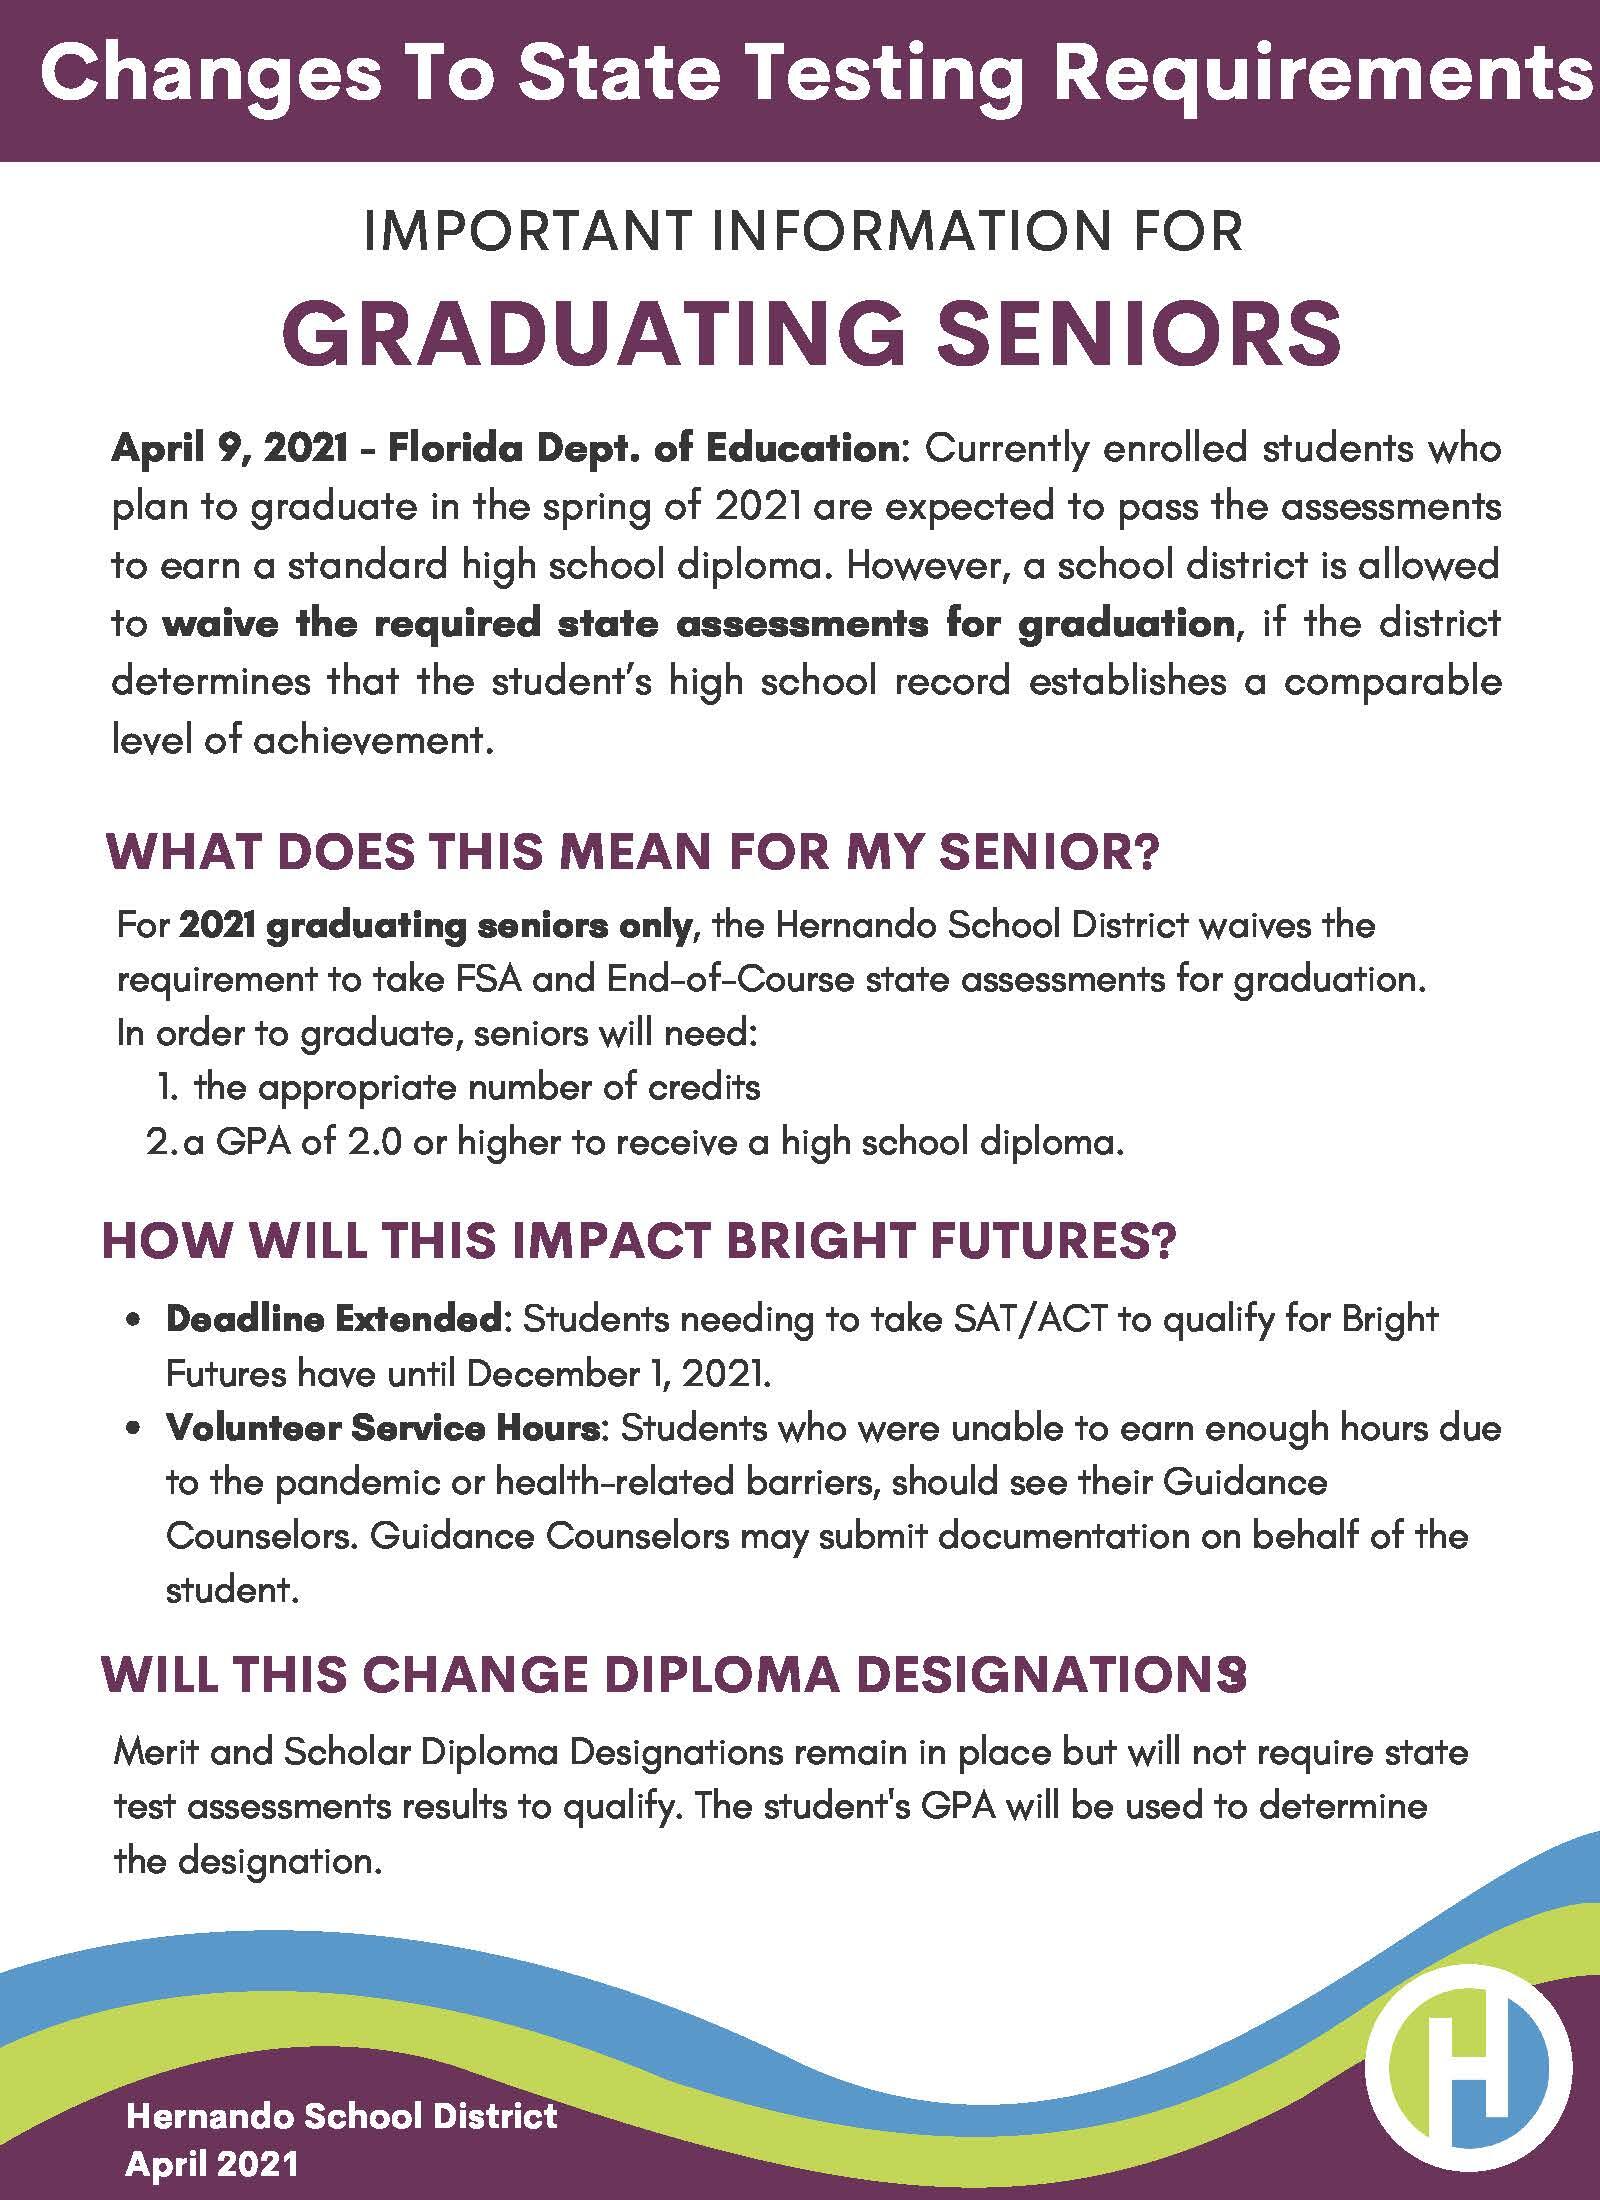 Guide to Understanding Changes to the State Testing for SENIORS